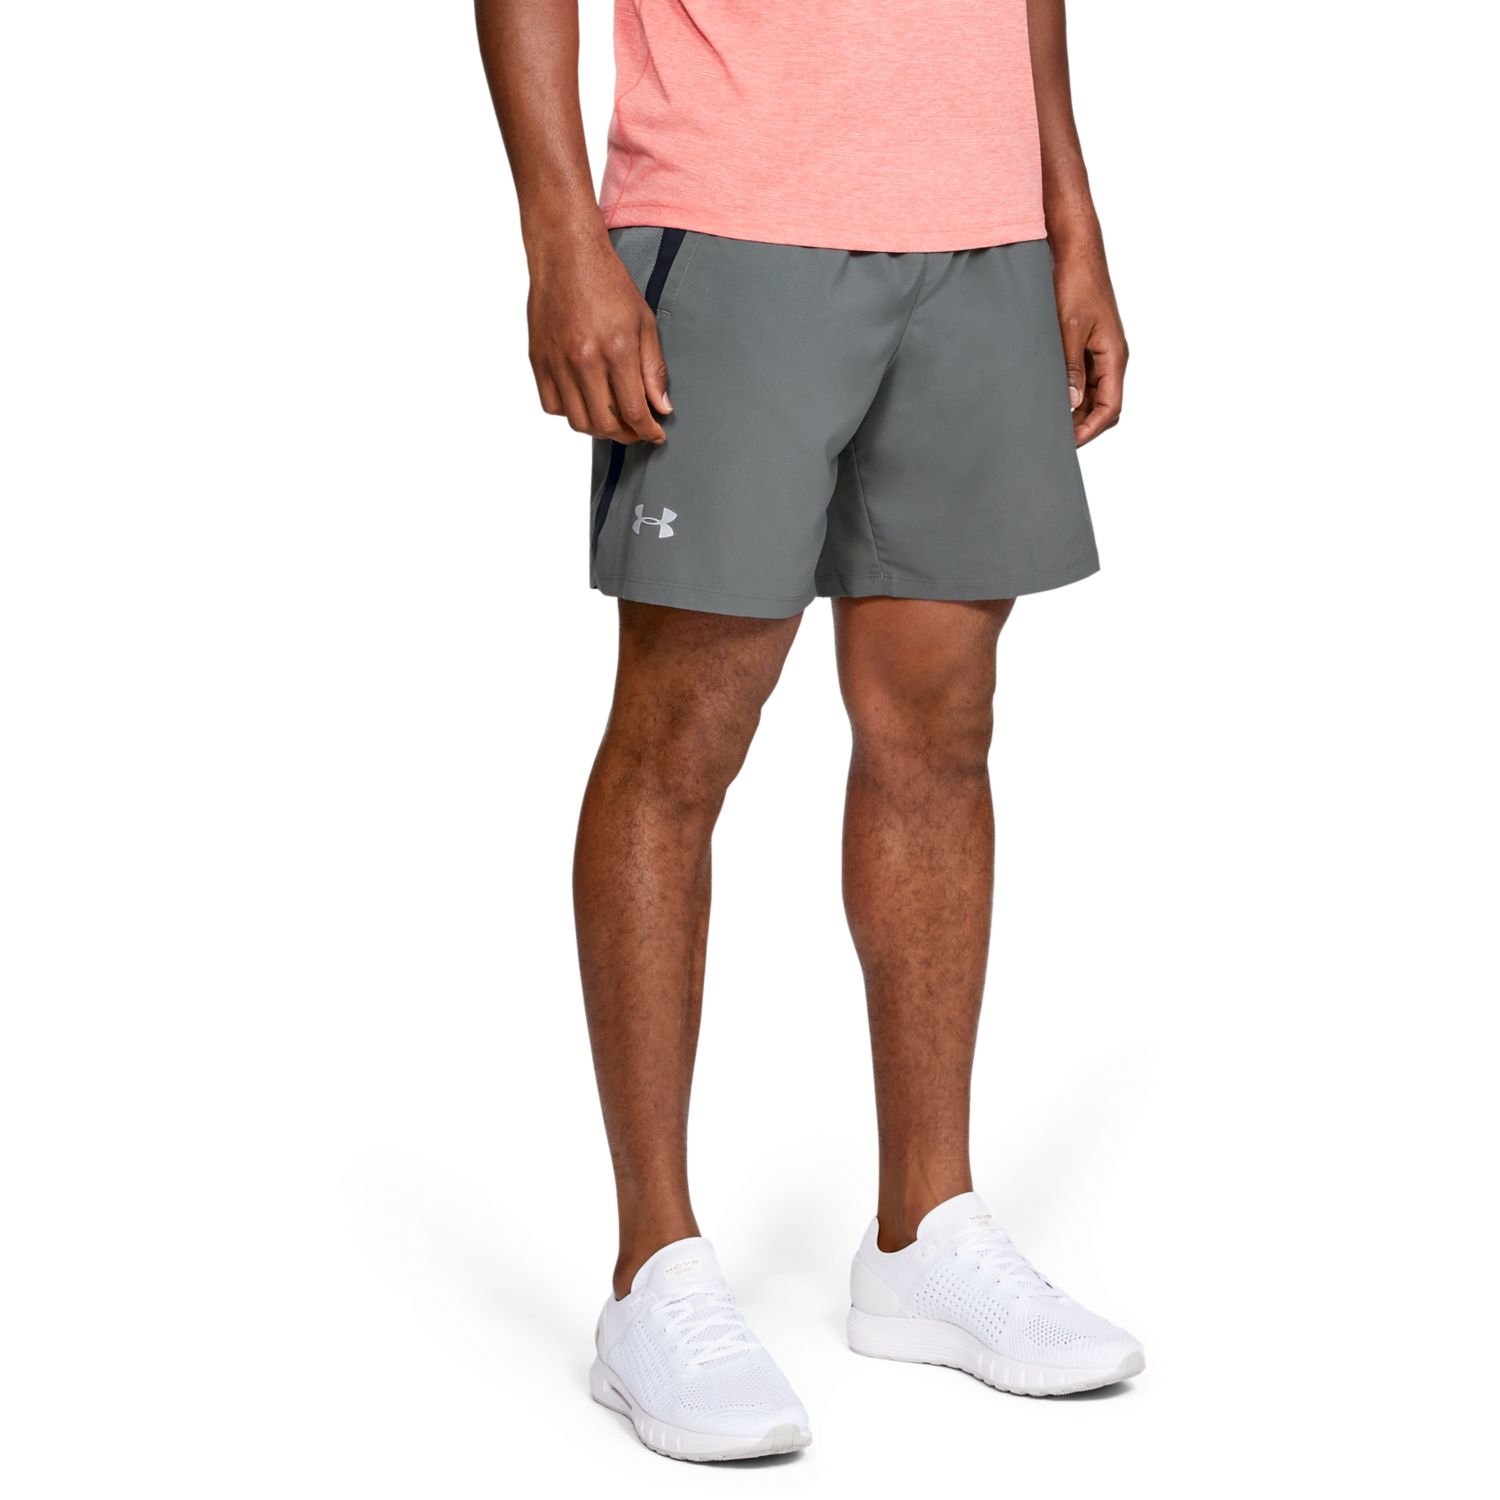 under armor launch shorts